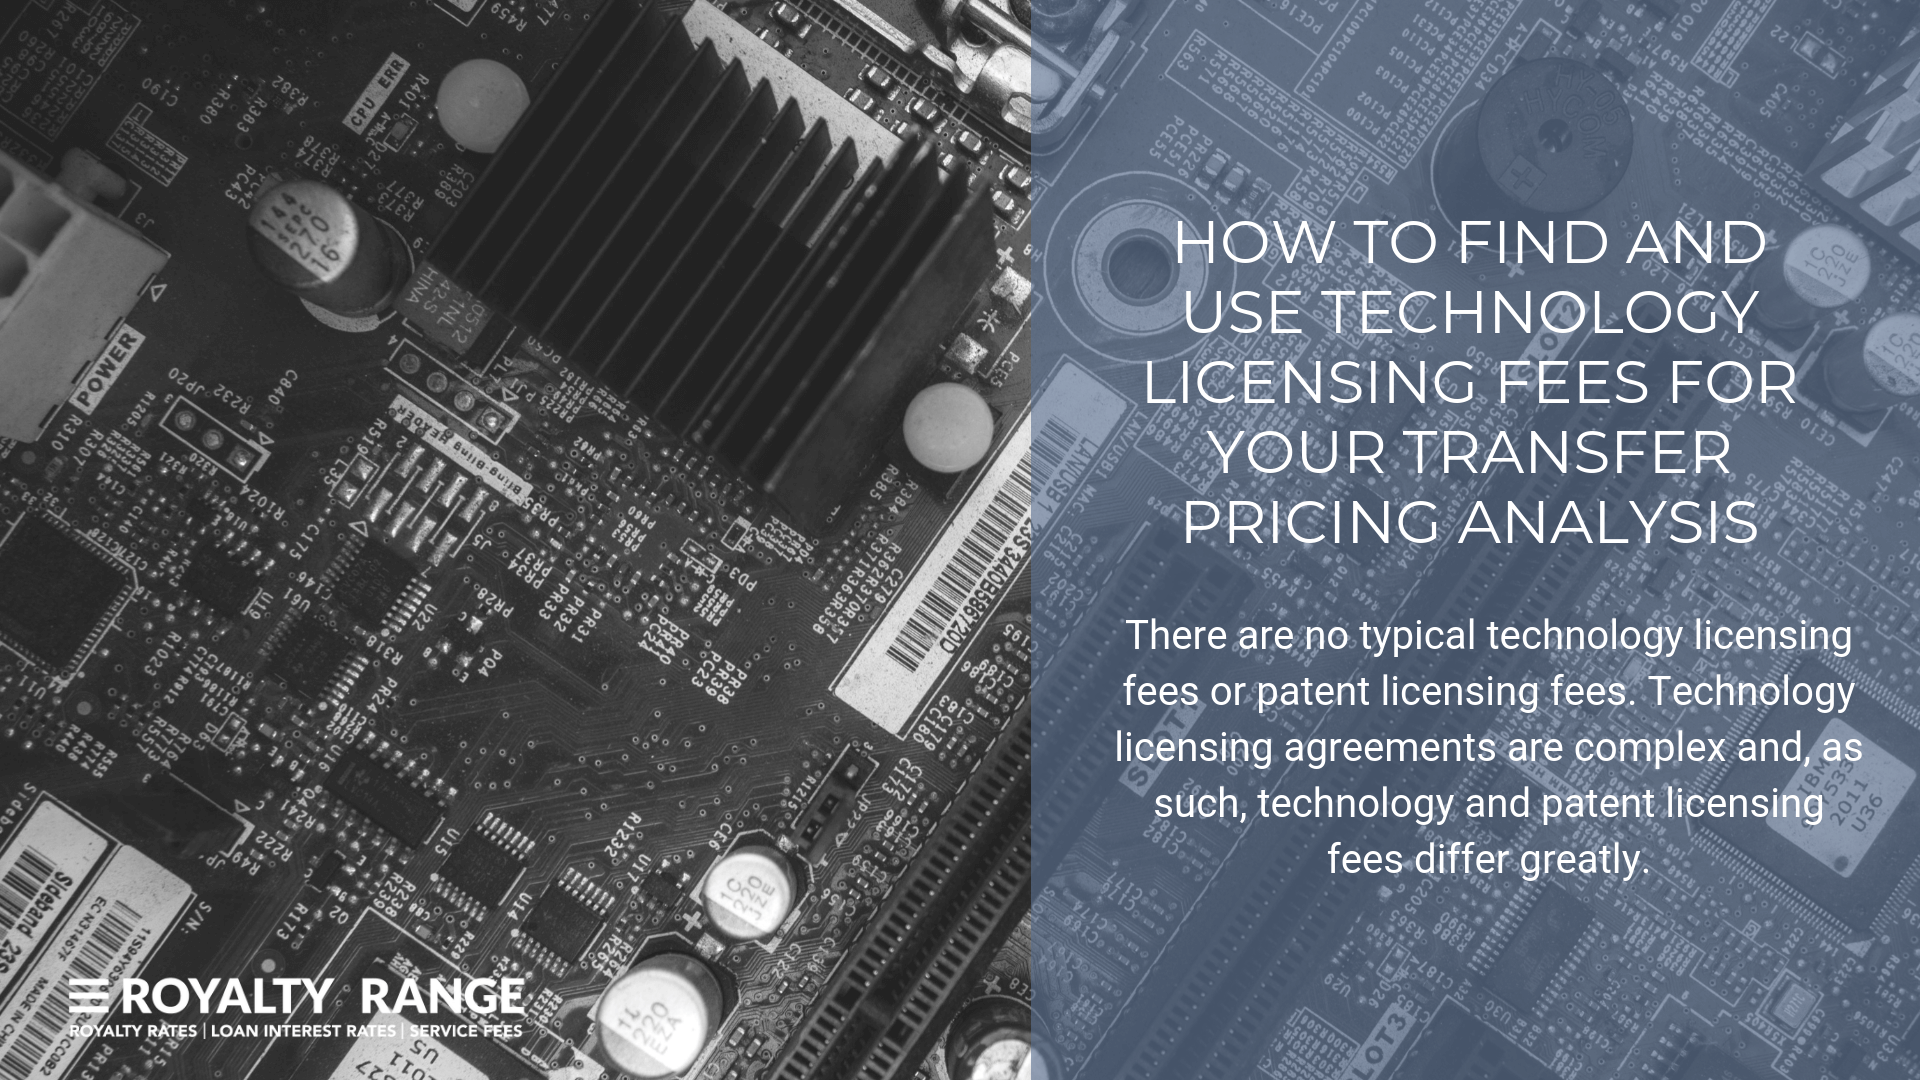 How to find and use technology licensing fees for your transfer pricing analysis